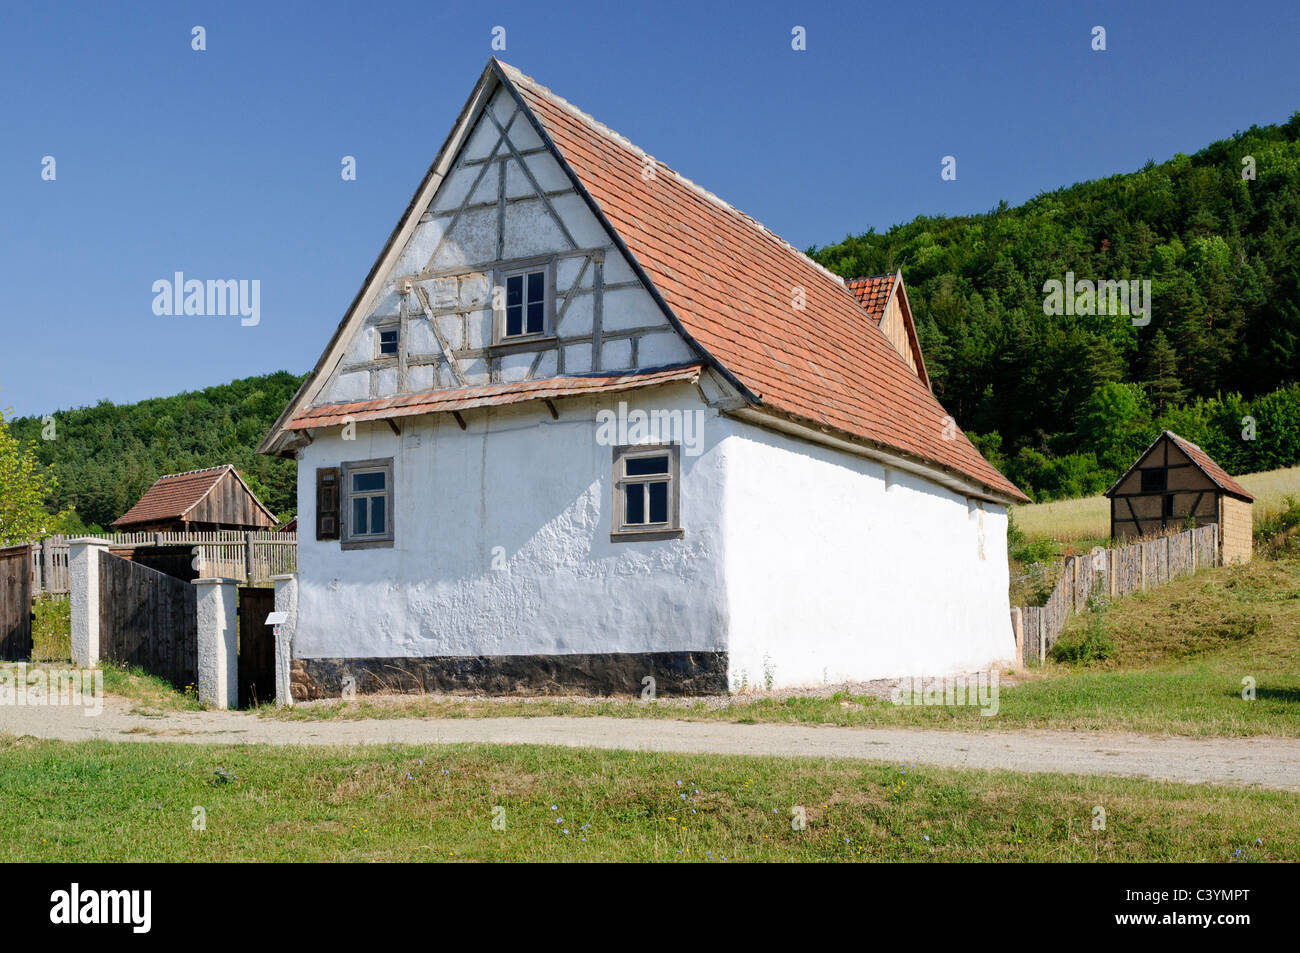 old, architecture, outside, outdoor, farmhouse, building, FRG, federal republic, German, Germany, outdoors, outside, European, E Stock Photo